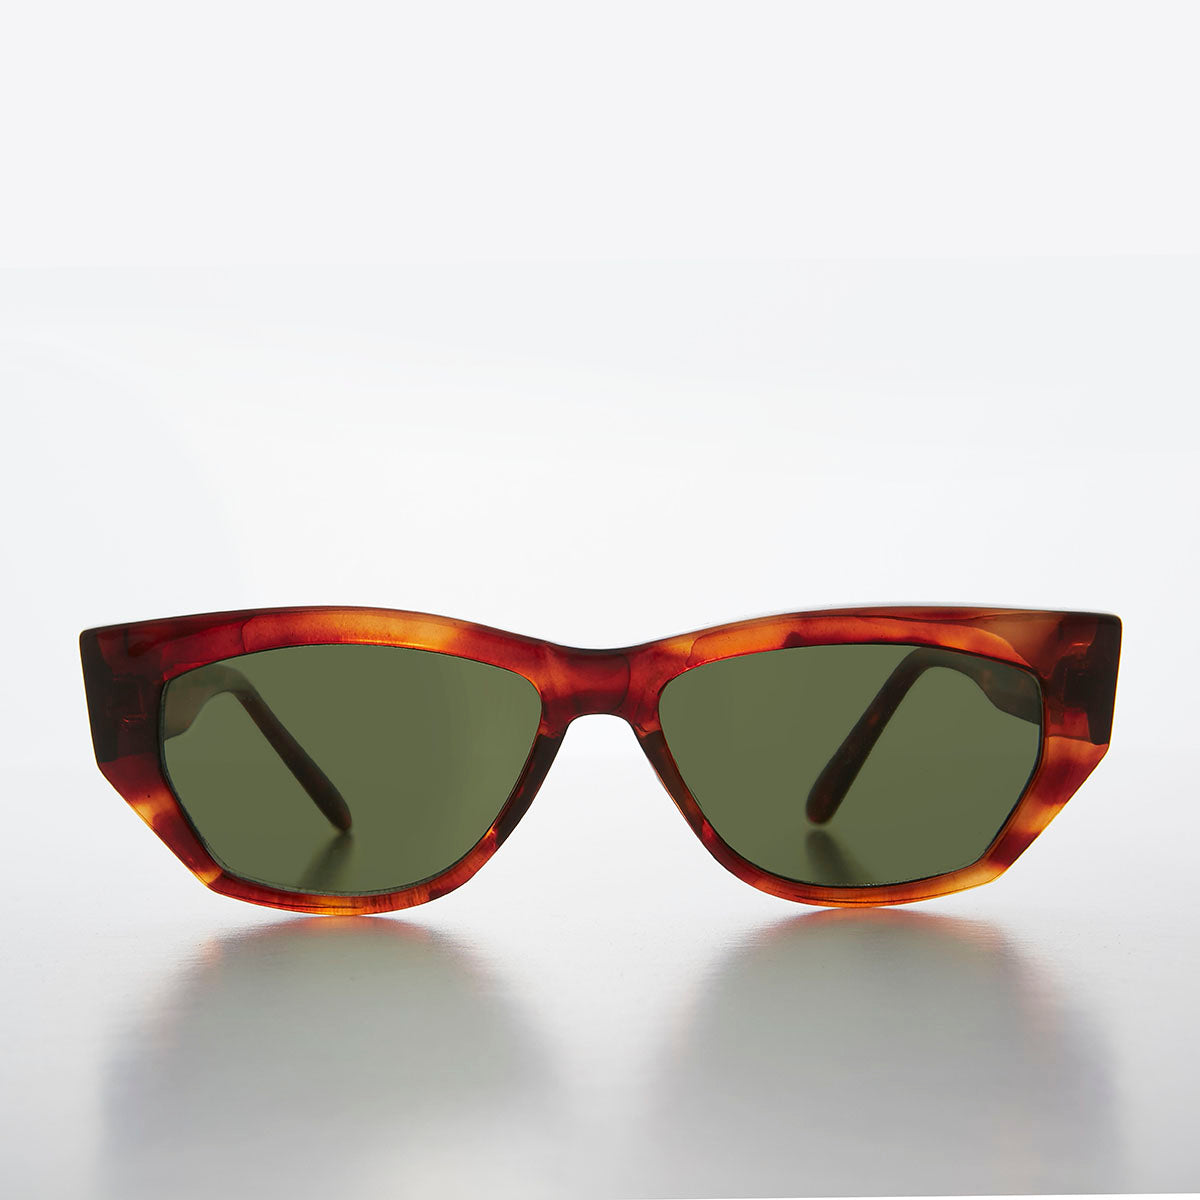 Chunky Mod Retro Sunglass with Gold Bling